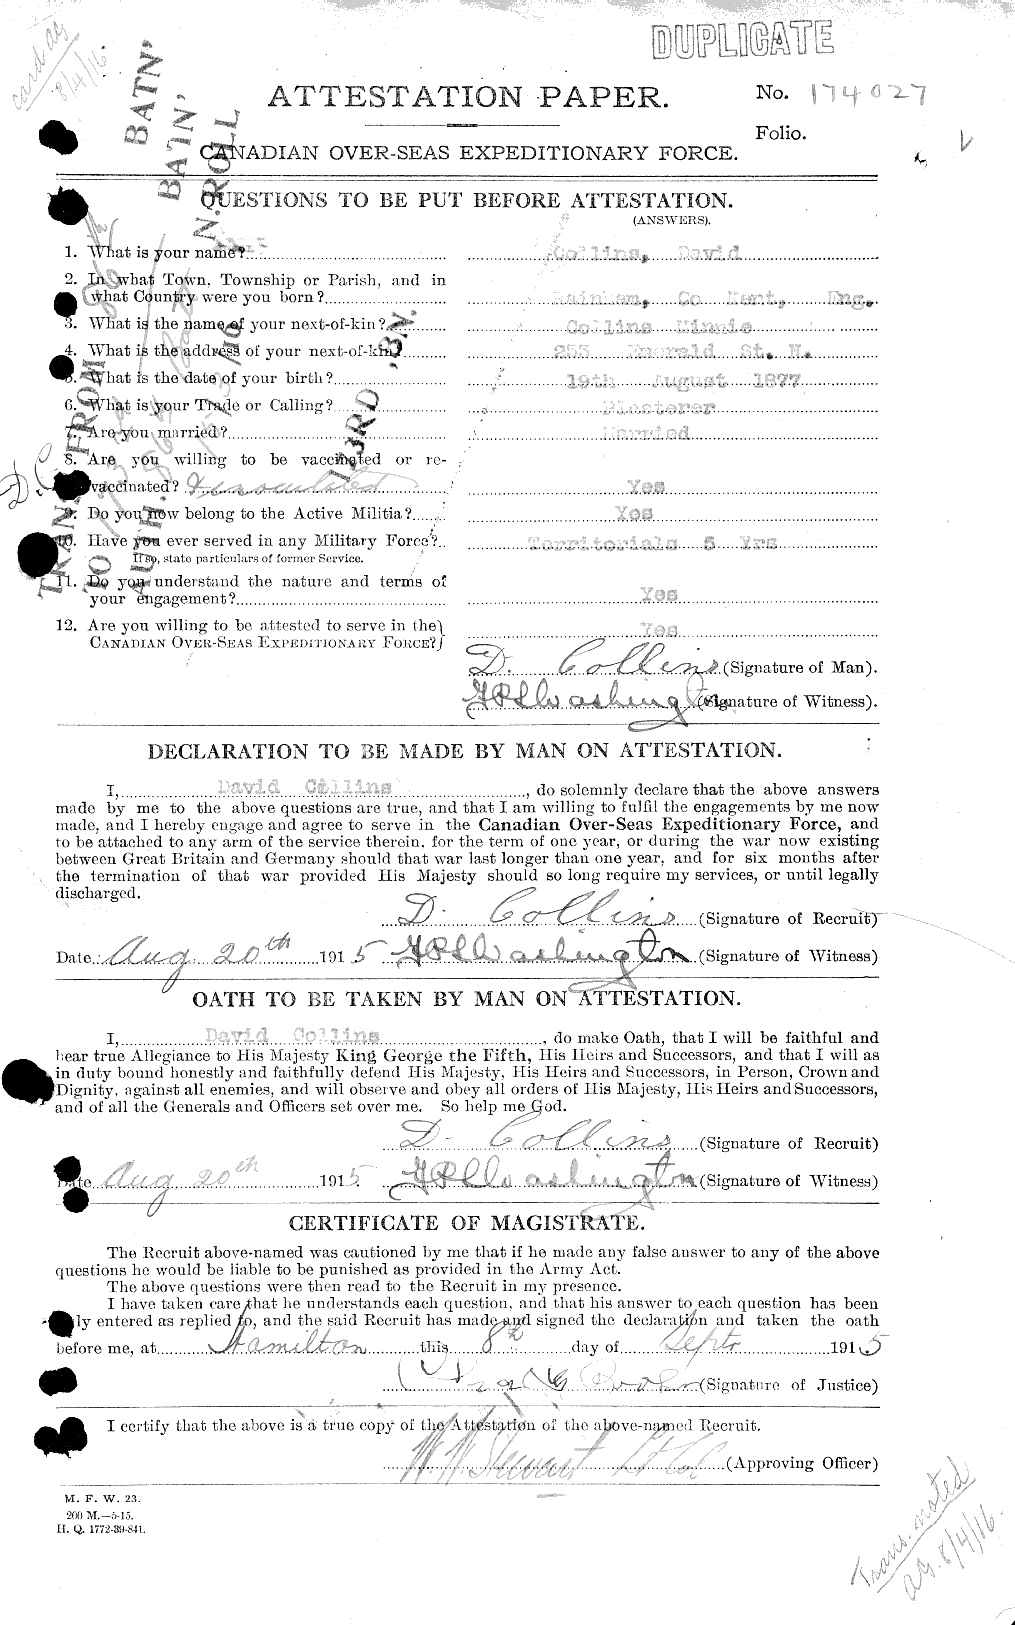 Personnel Records of the First World War - CEF 029071a